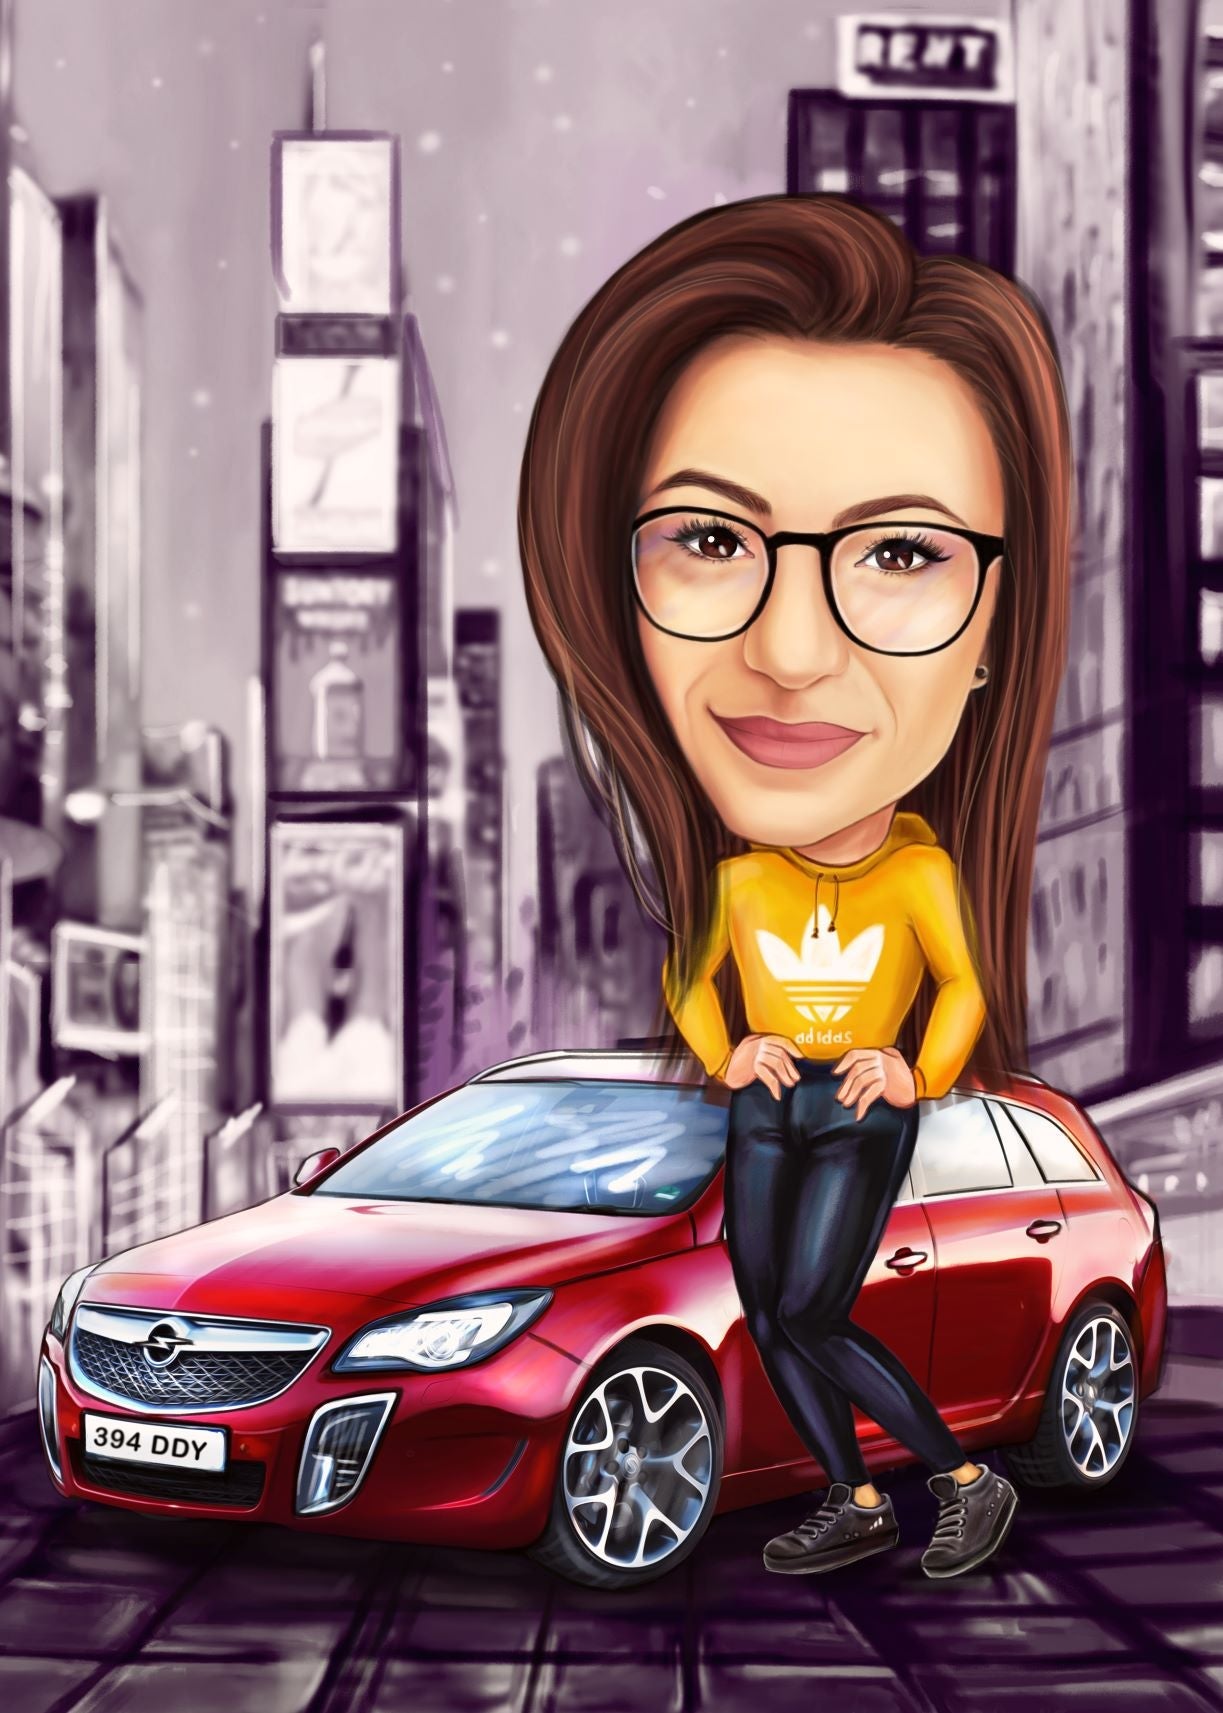 In the city by car caricature